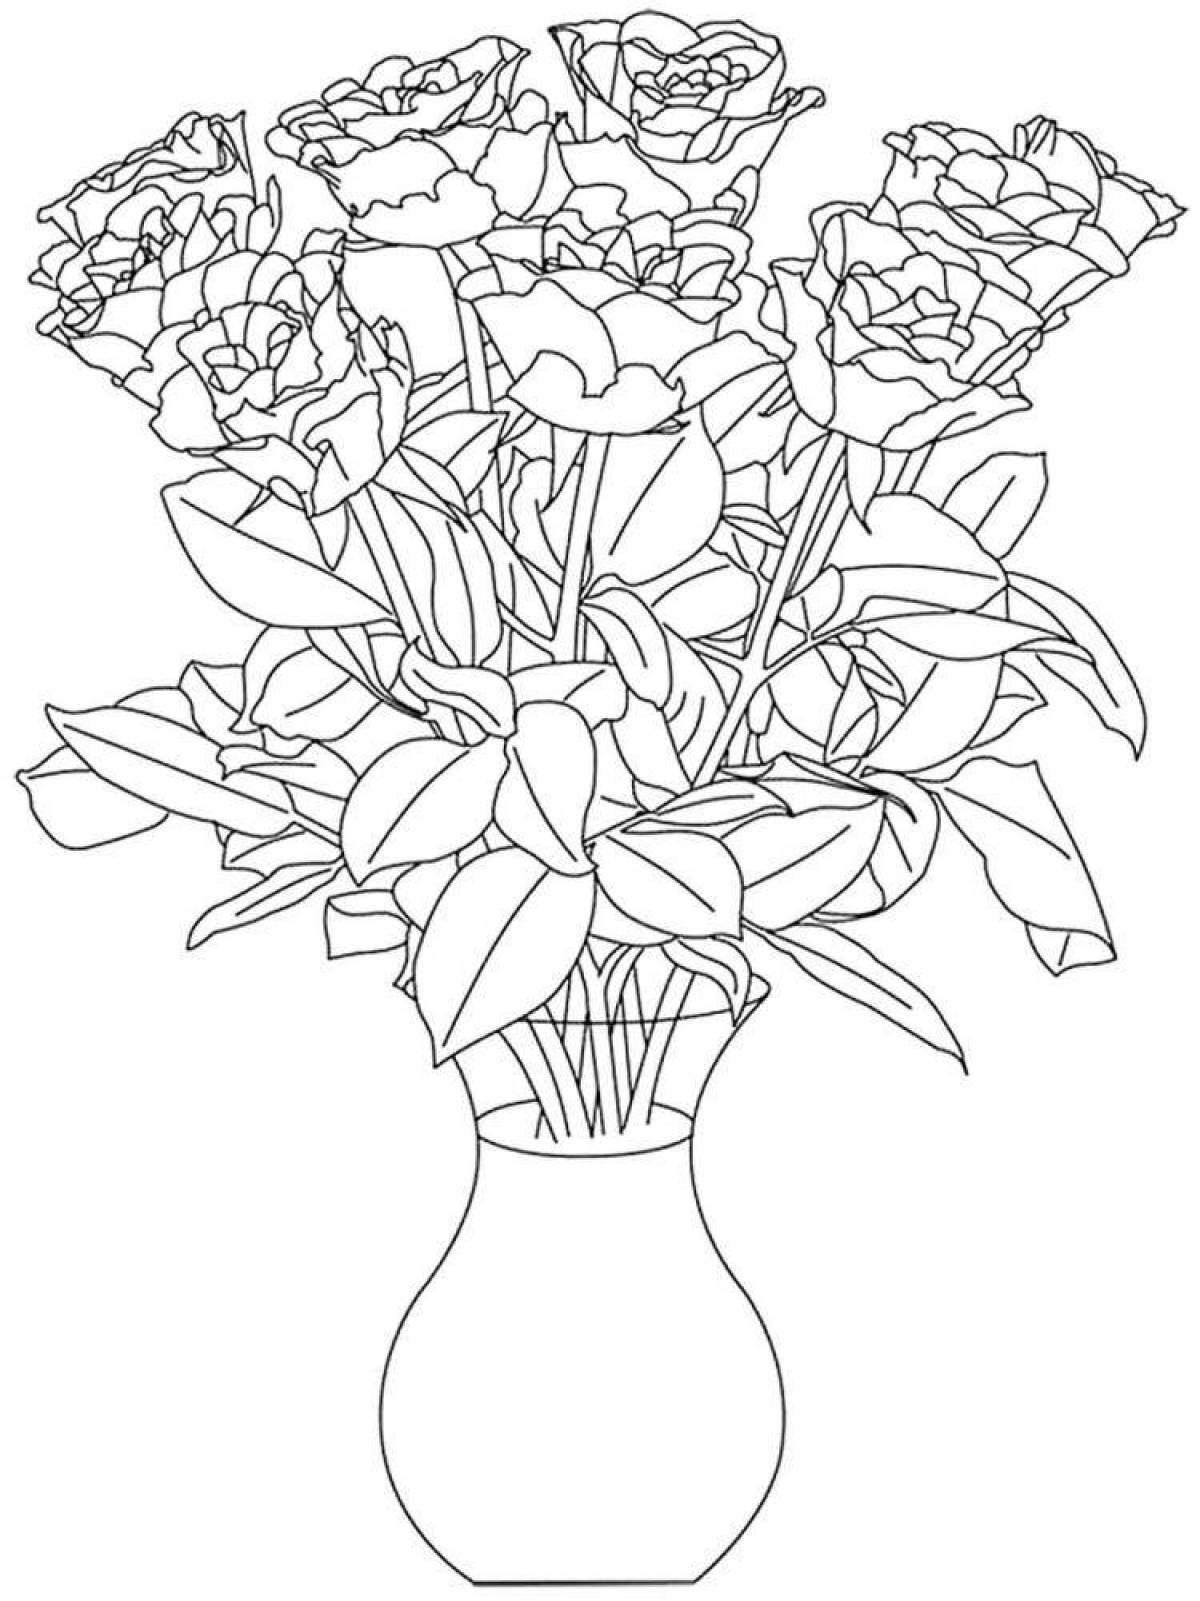 Coloring colorful bouquet of roses